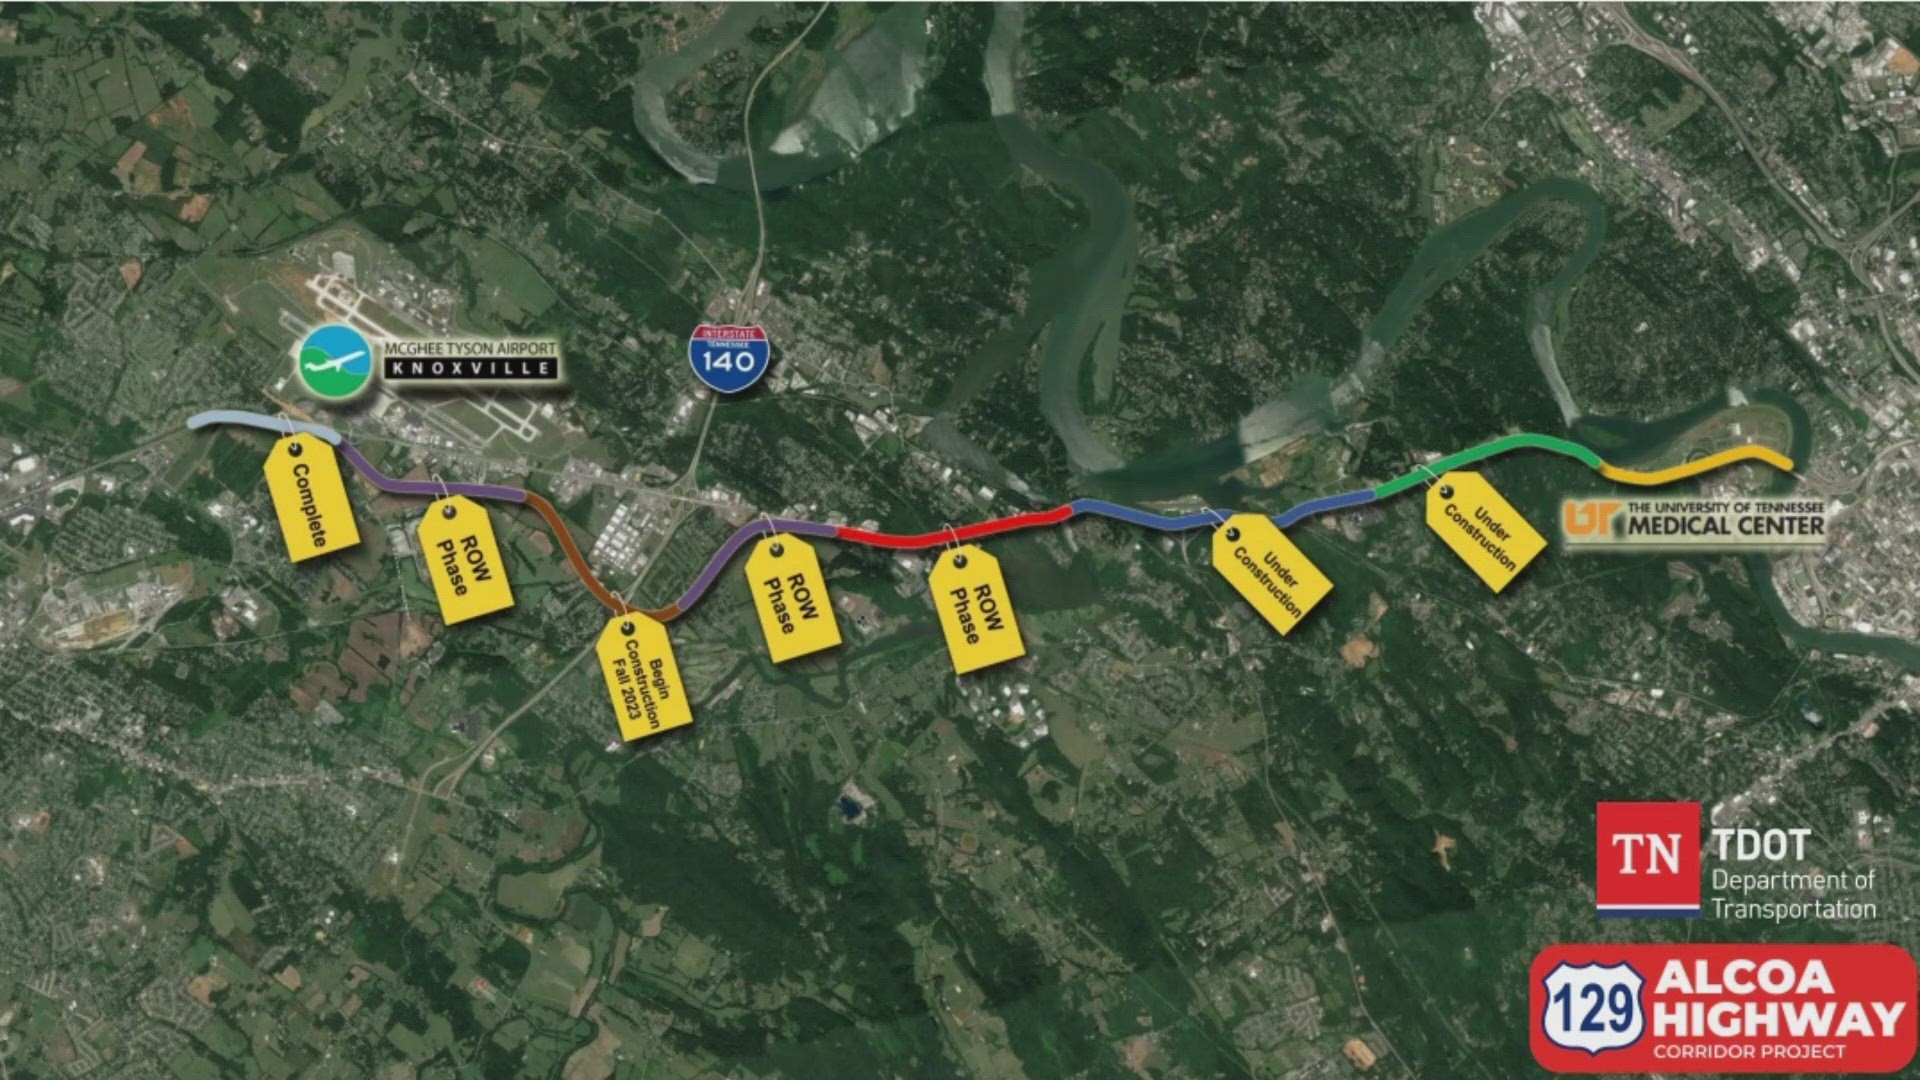 A viewer told us they looked everywhere for a proposed timeline for the improvements on Alcoa Highway and never found anything. Here is what we learned.